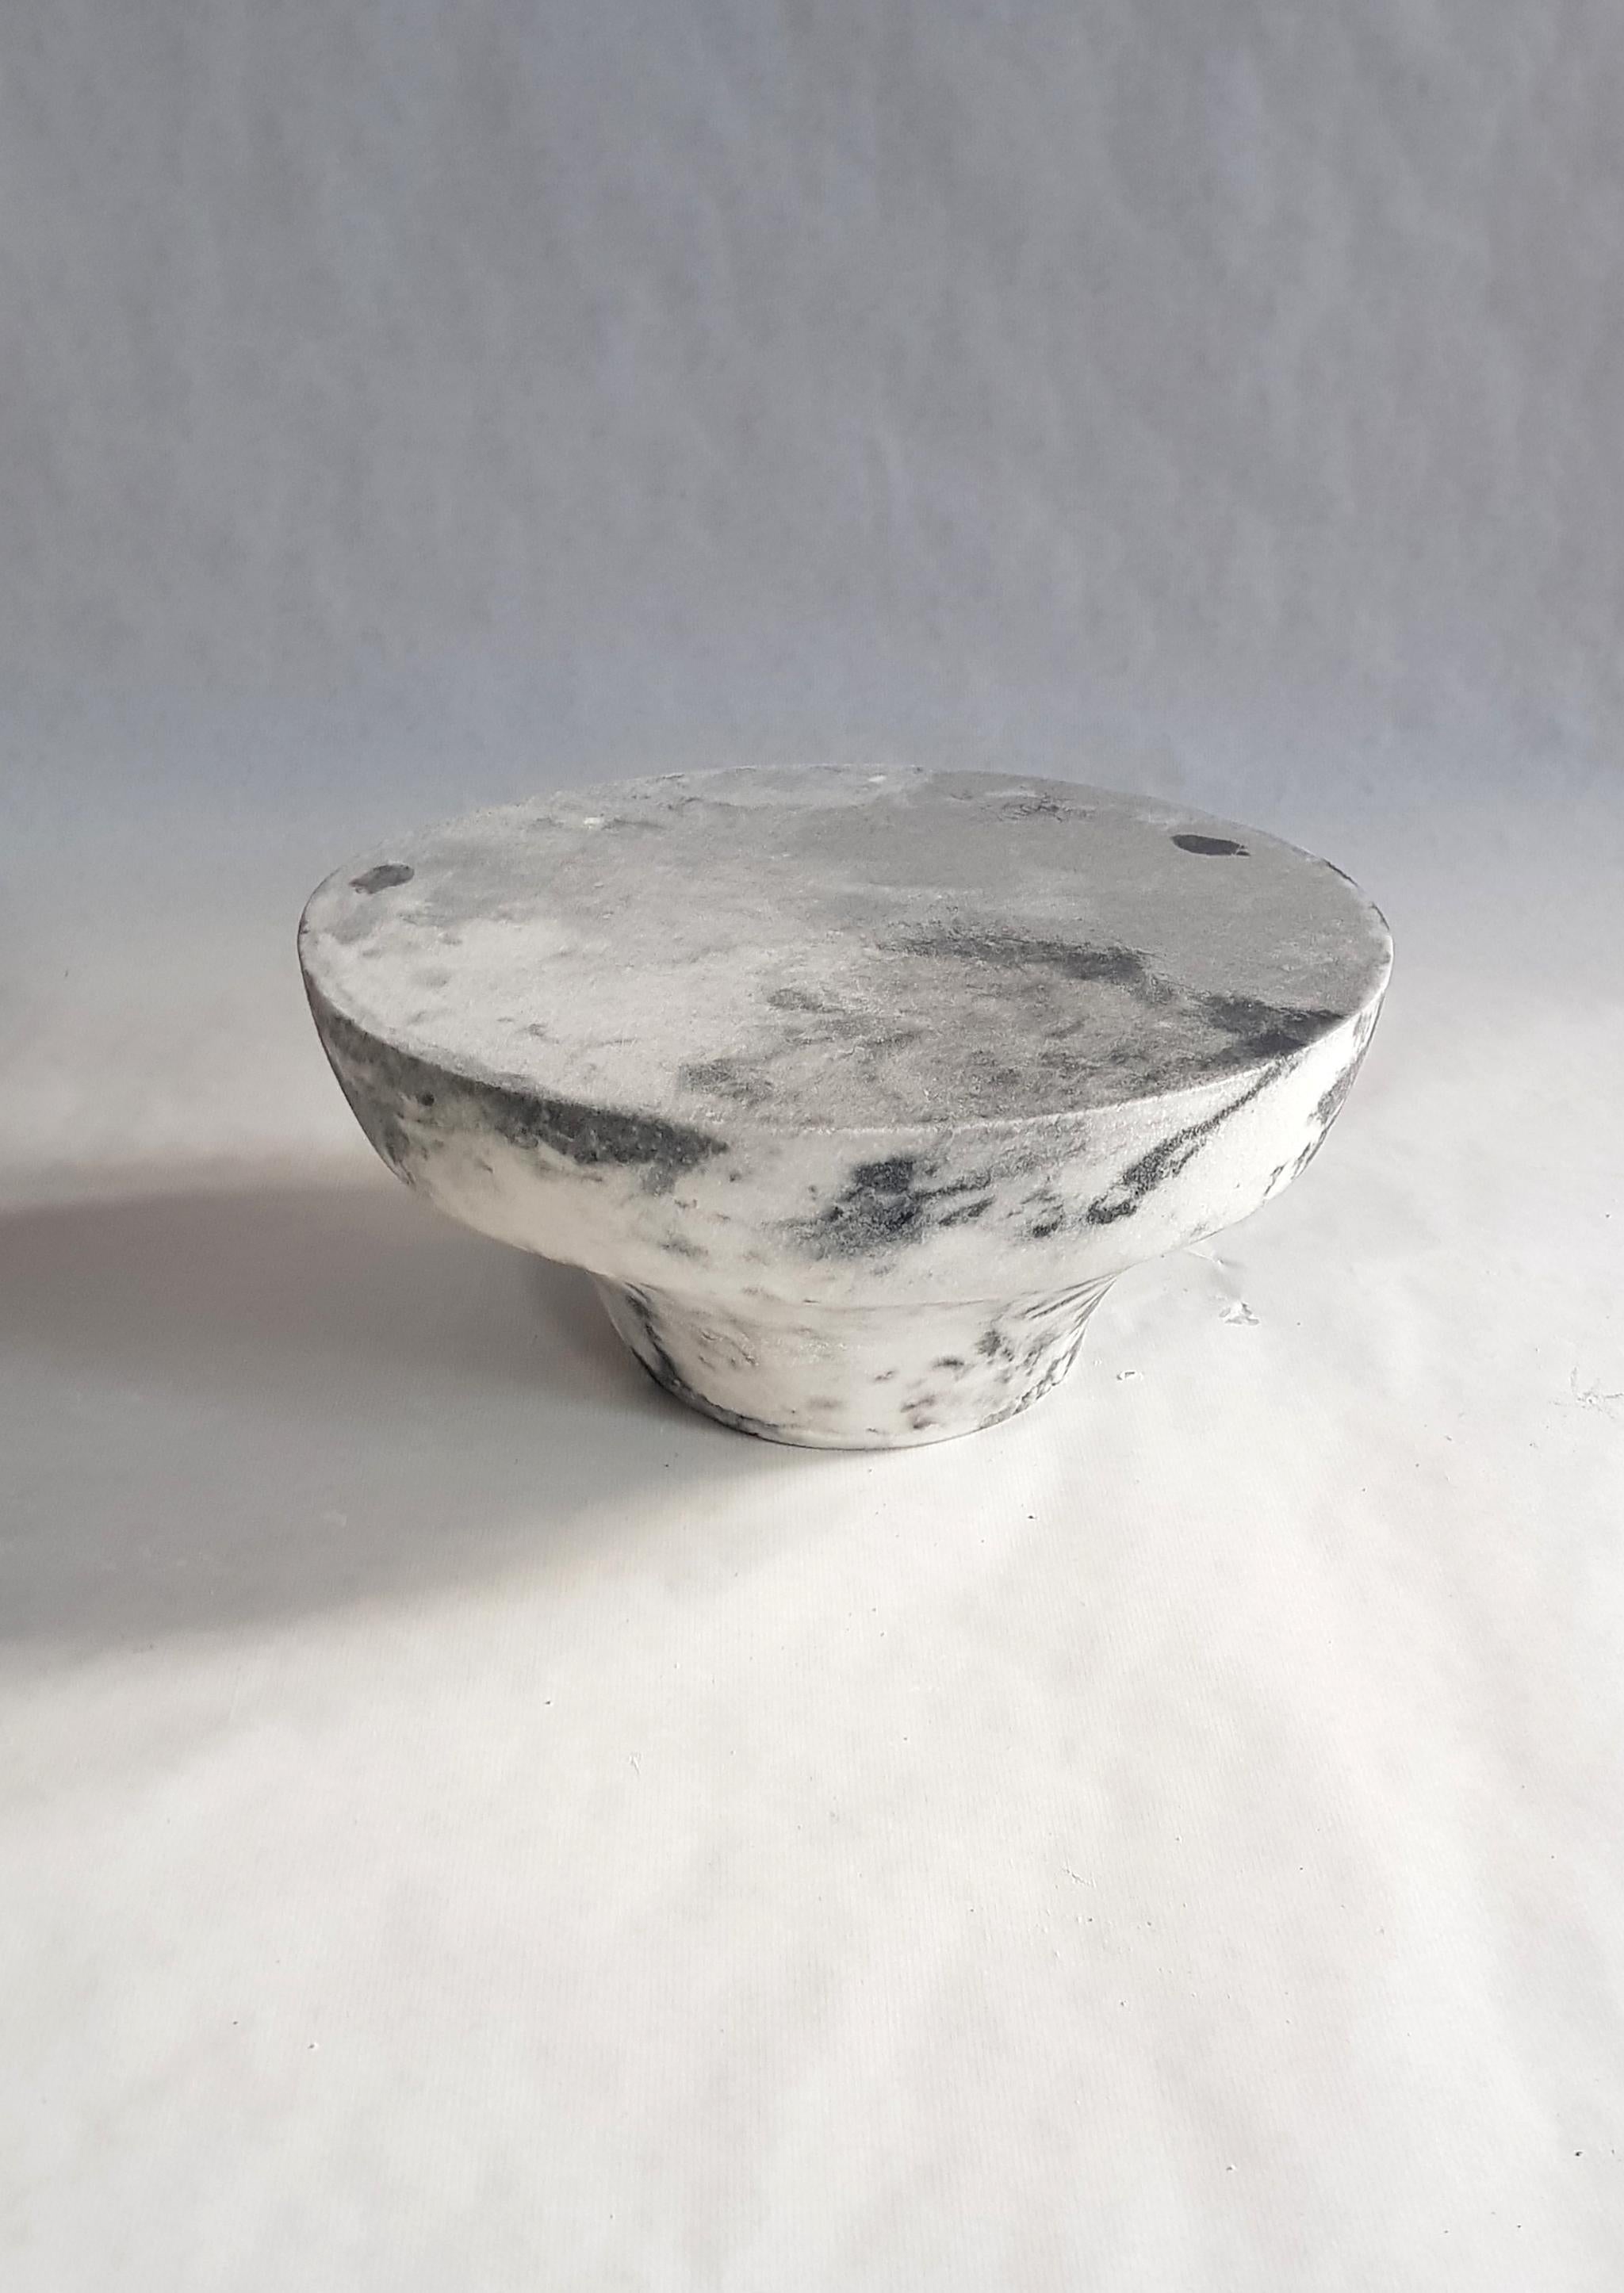 Marble salt meditation stool by Roxane Lahidji
Material: Marbled salts
A unique award winning technique developed by Roxane Lahidji
Dimensions: 40 x 40 x 30 cm
Unique

Award winner of Bolia Design Awards 2019 and FD100 and present in the collections